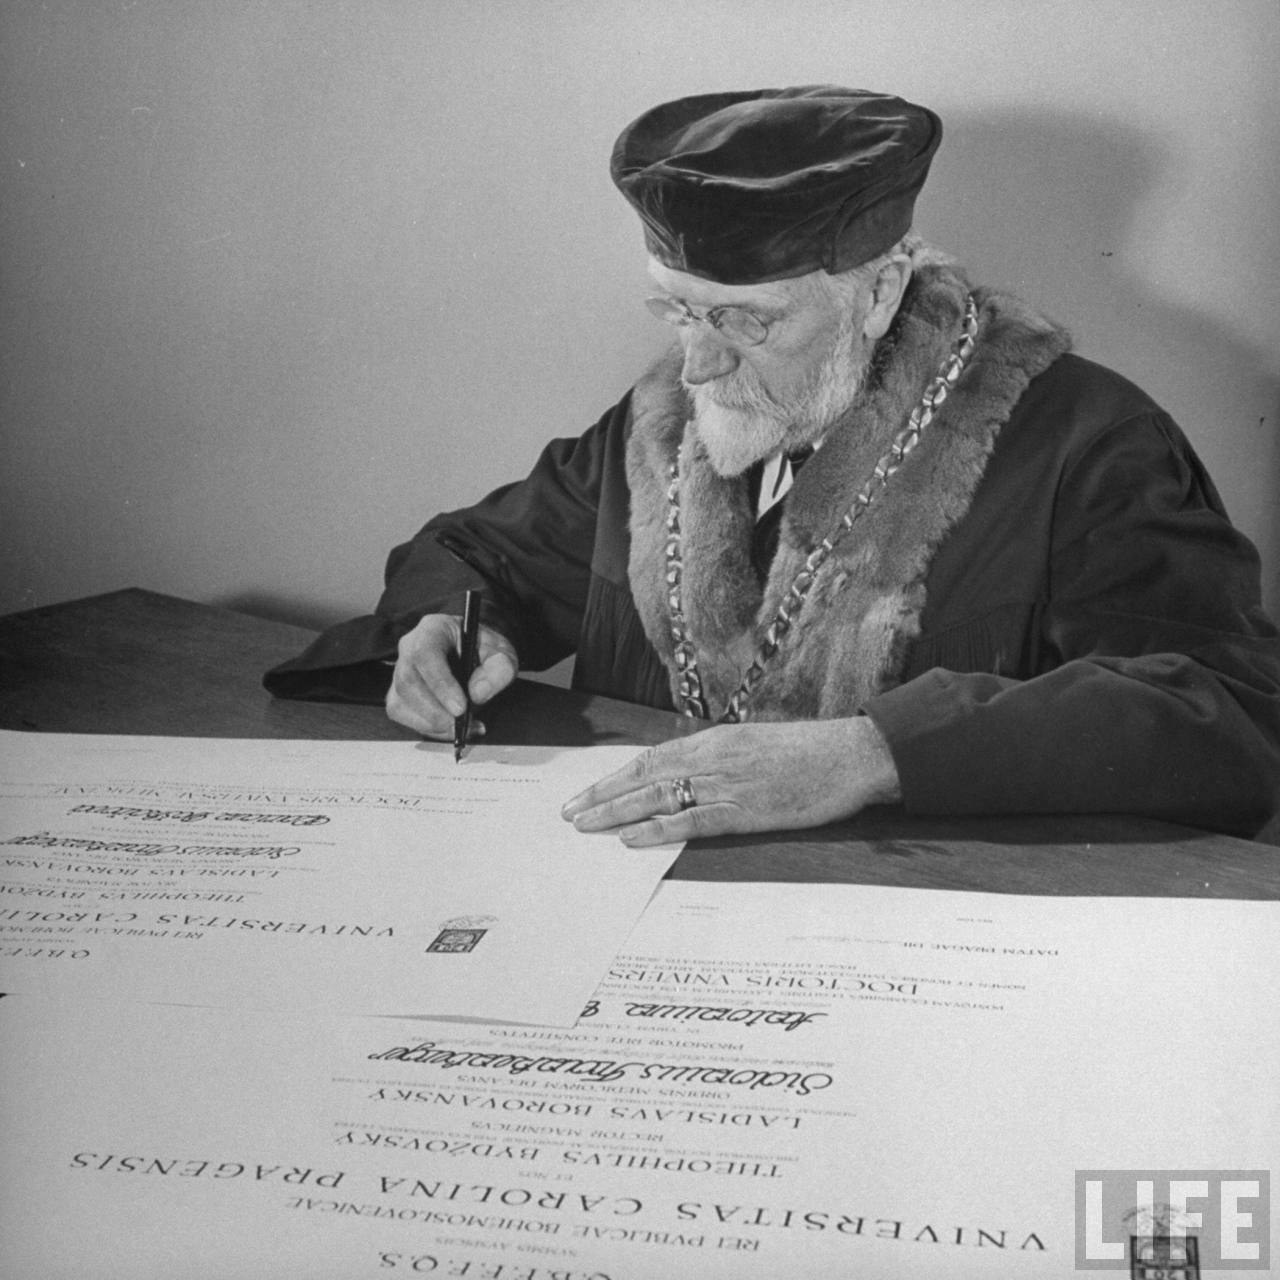 Bohumil Bydzovsky, rector of Charles University, signing diplomas in his office.